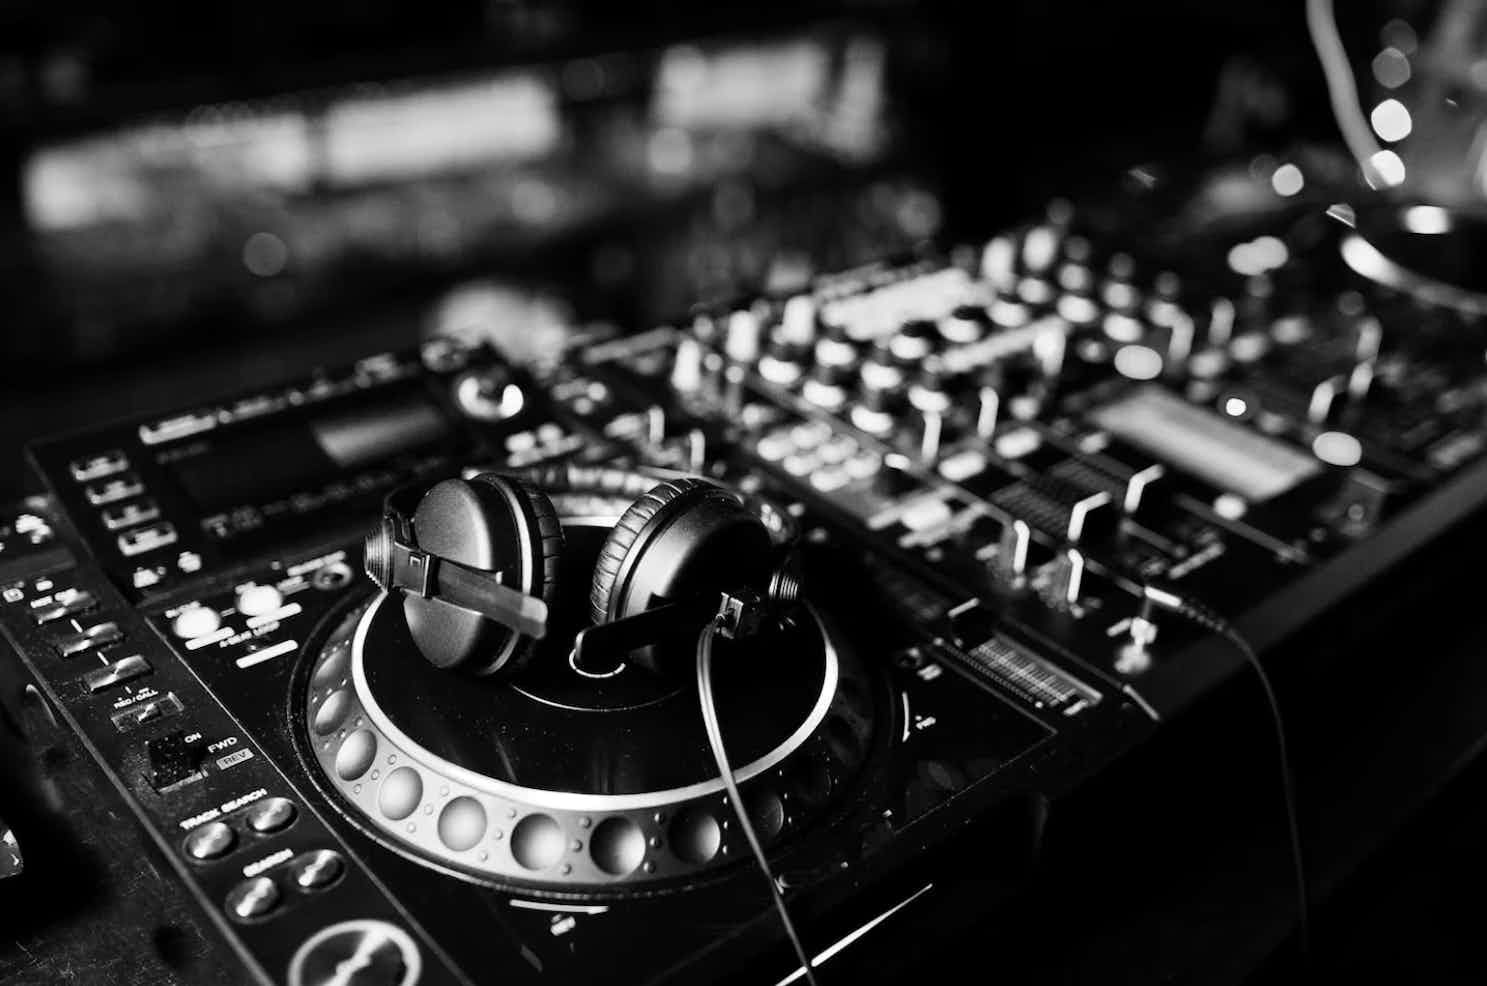 An image of a pair of headphones laying on top of some CDJ's.